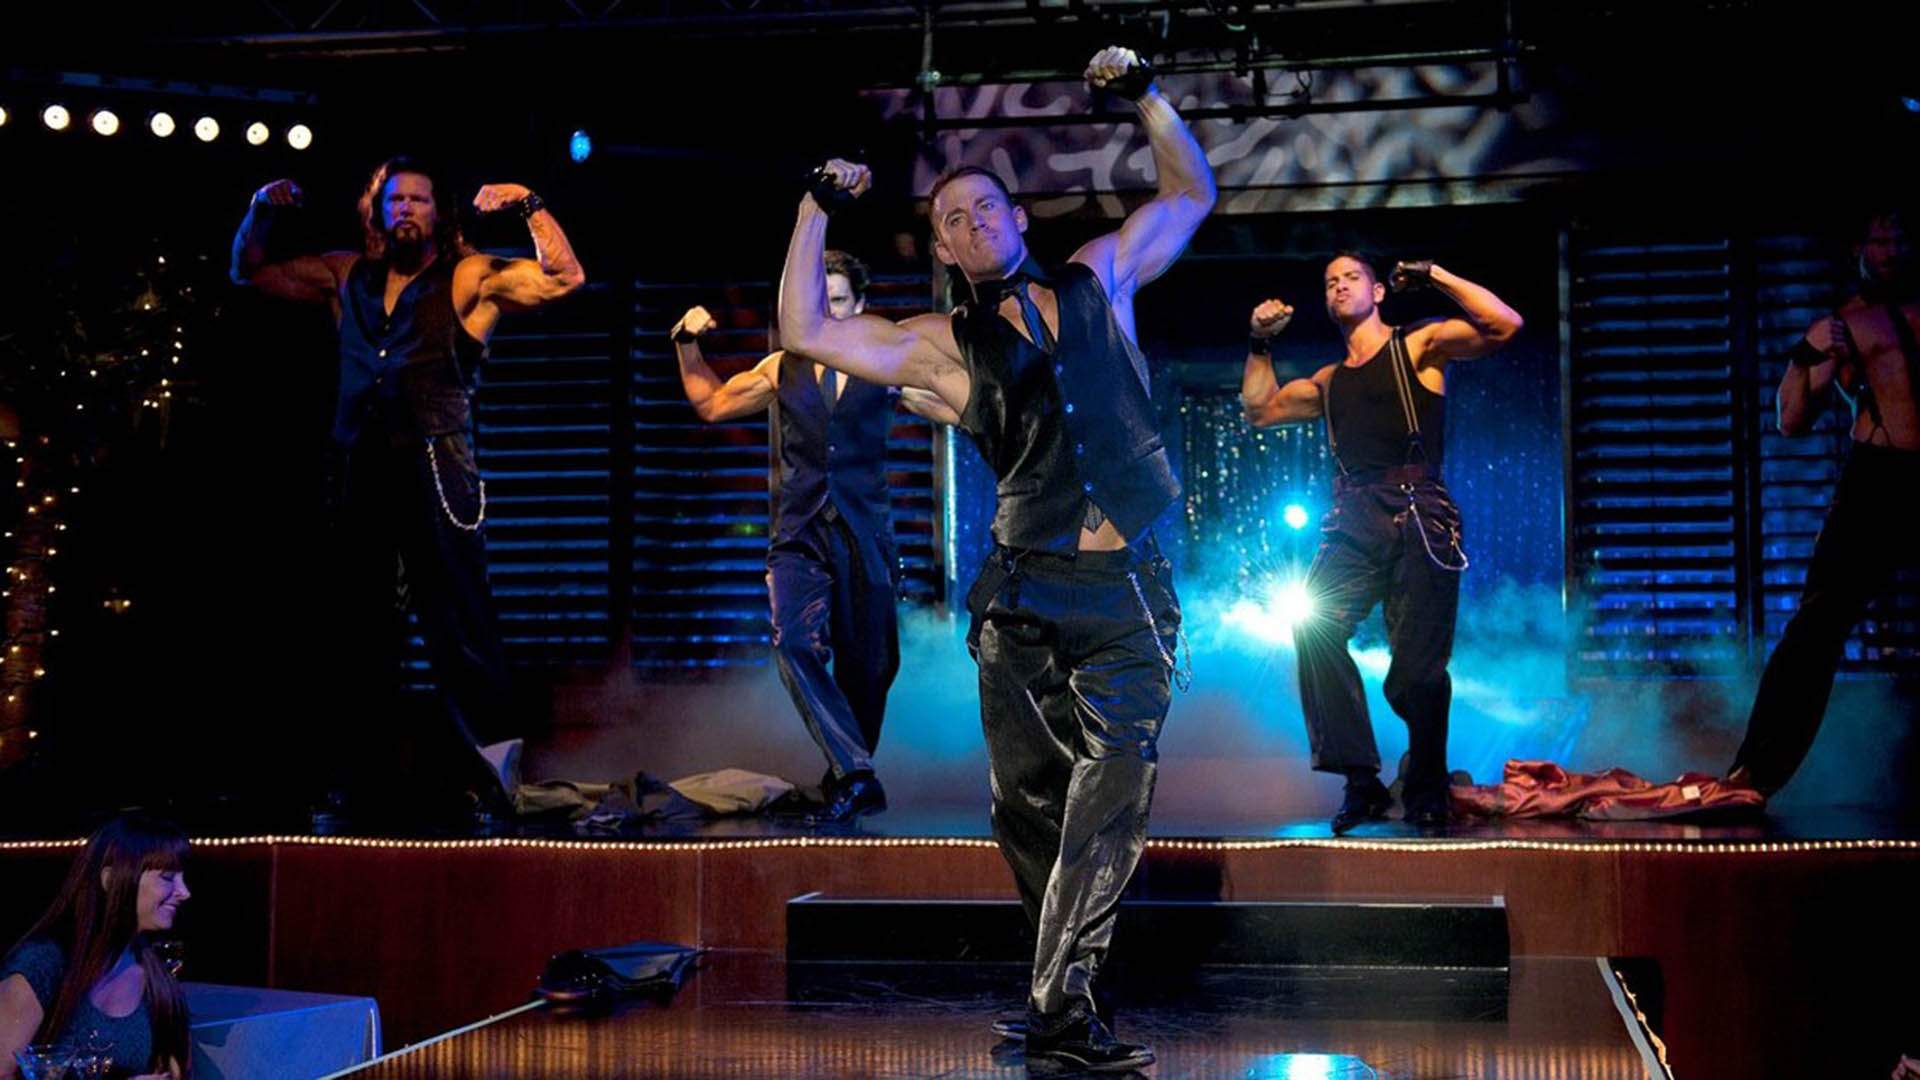 'Magic Mike' Is Being Turned Into a Stage Musical